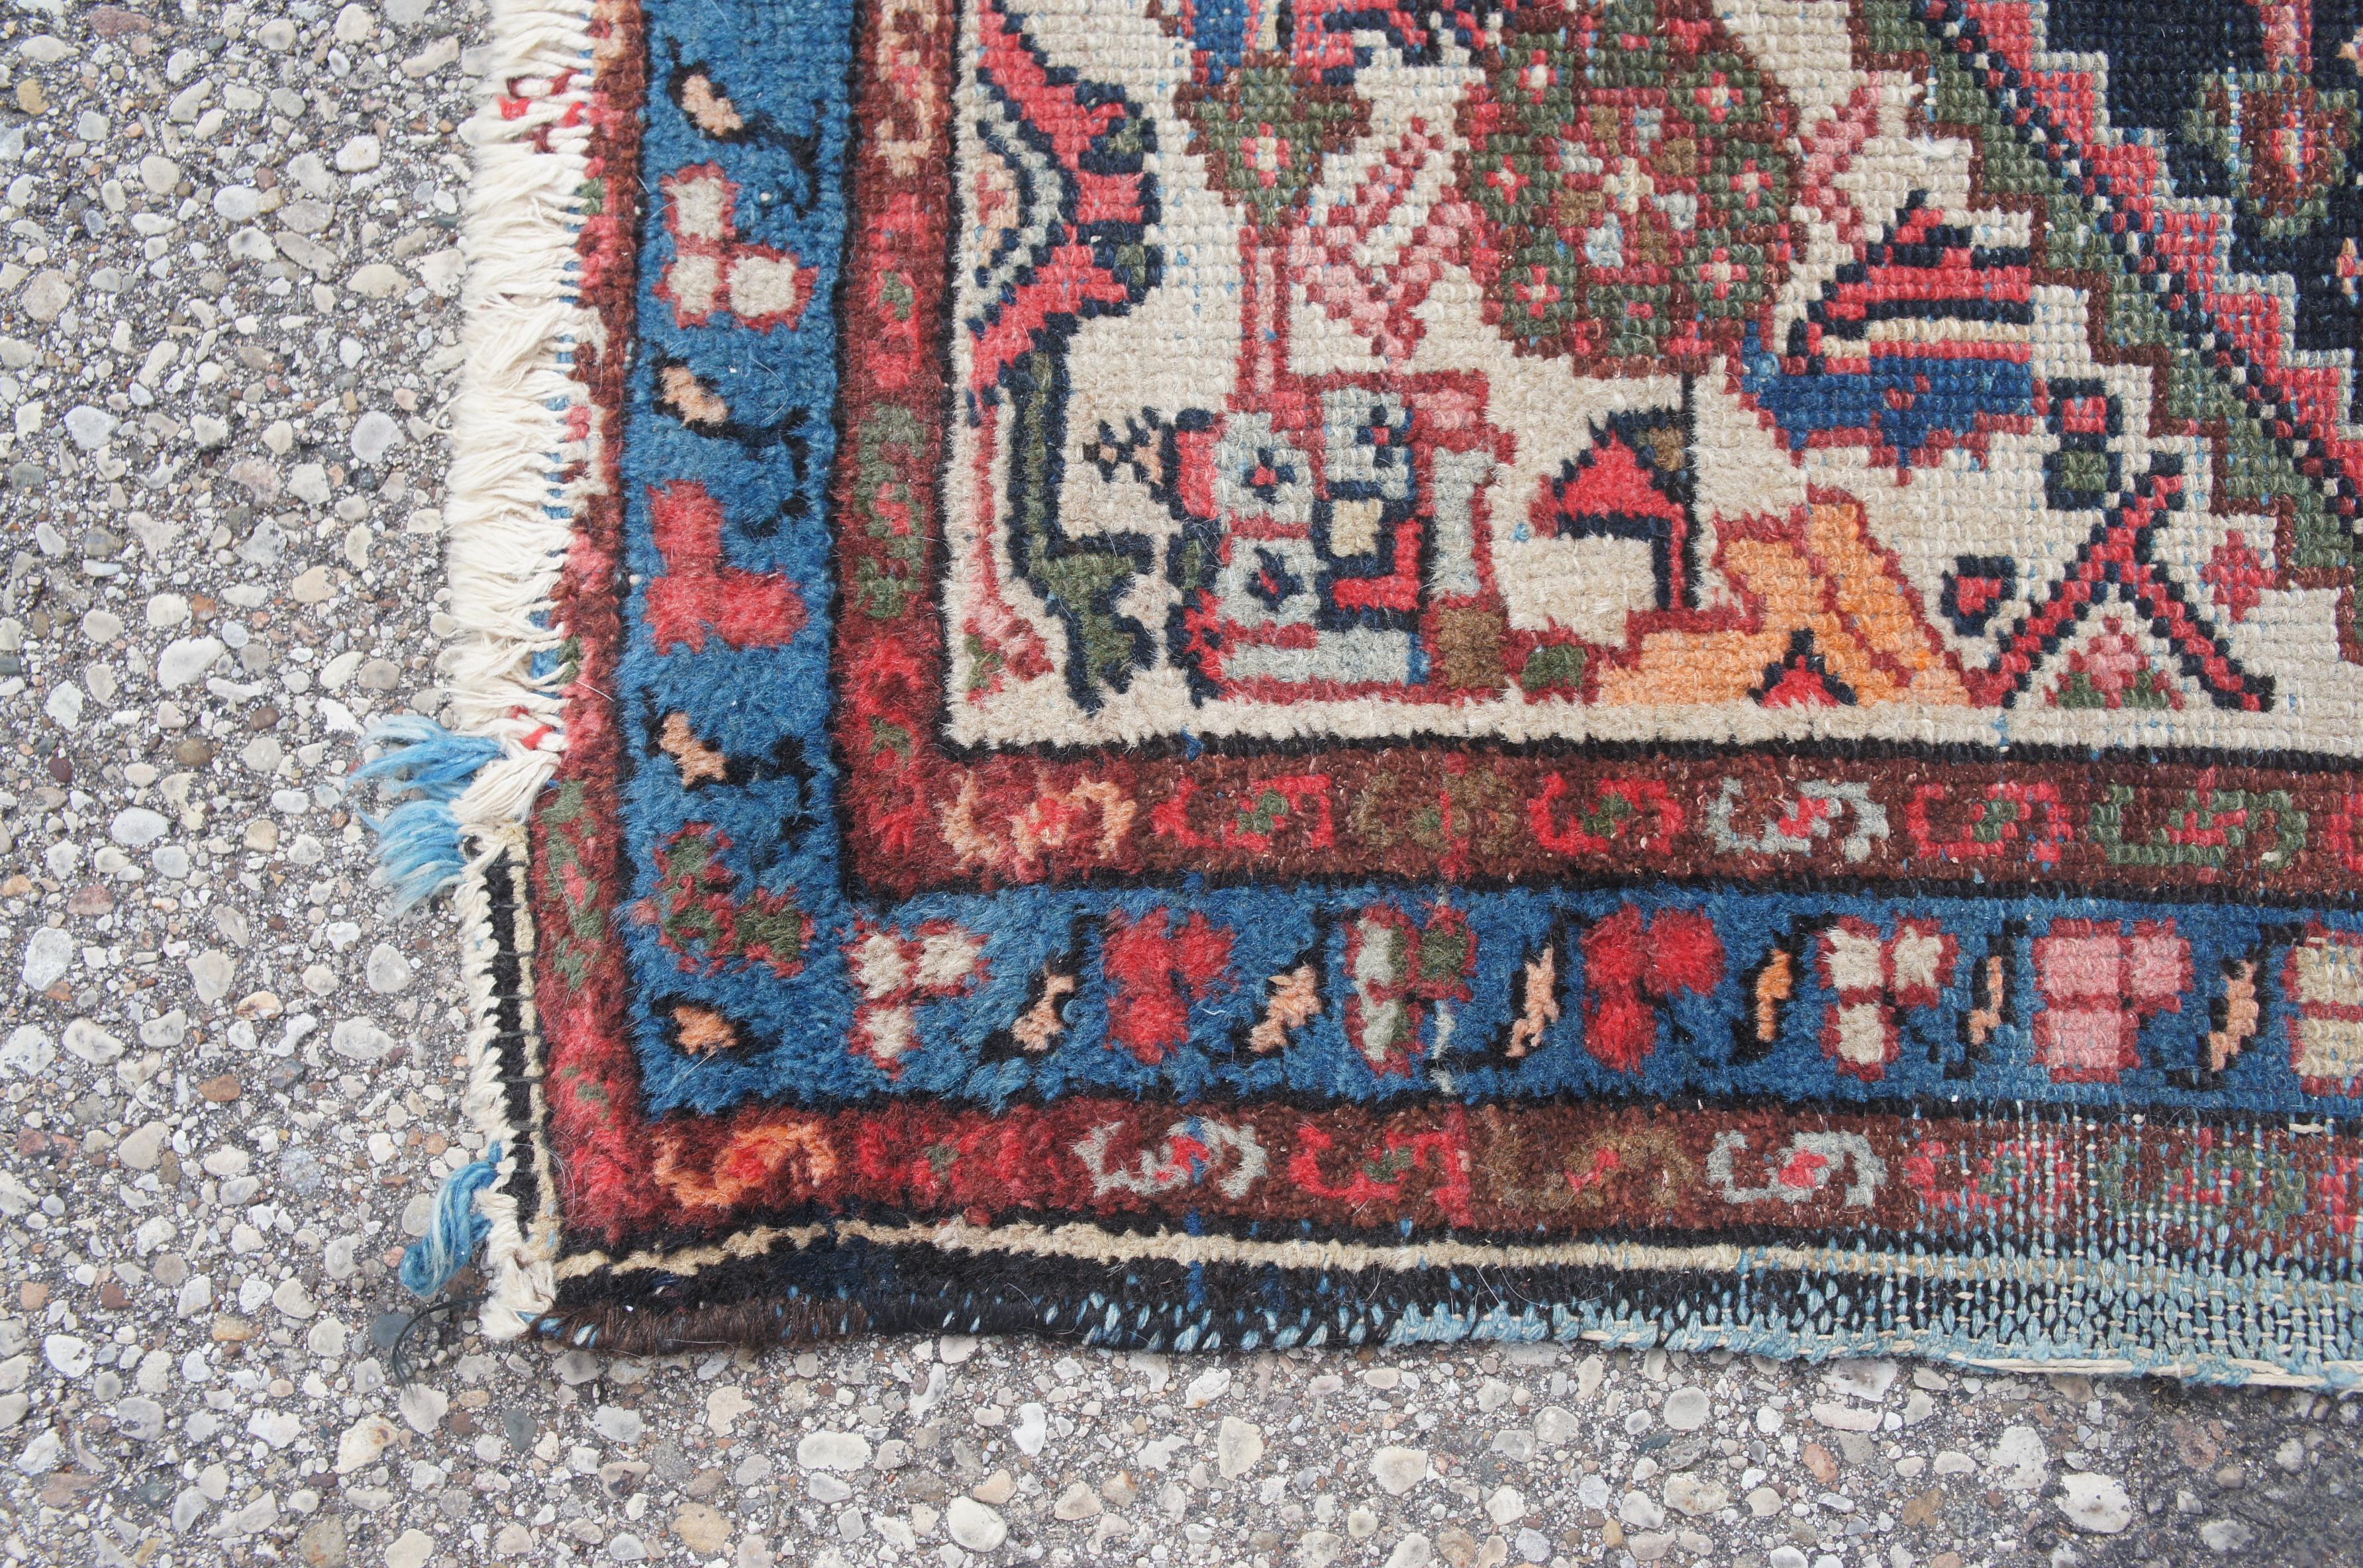 Hand Woven Persian Kurdish Geometric Red & Blue Wool Area Rug Prayer Mat 3 x 4' In Good Condition For Sale In Dayton, OH